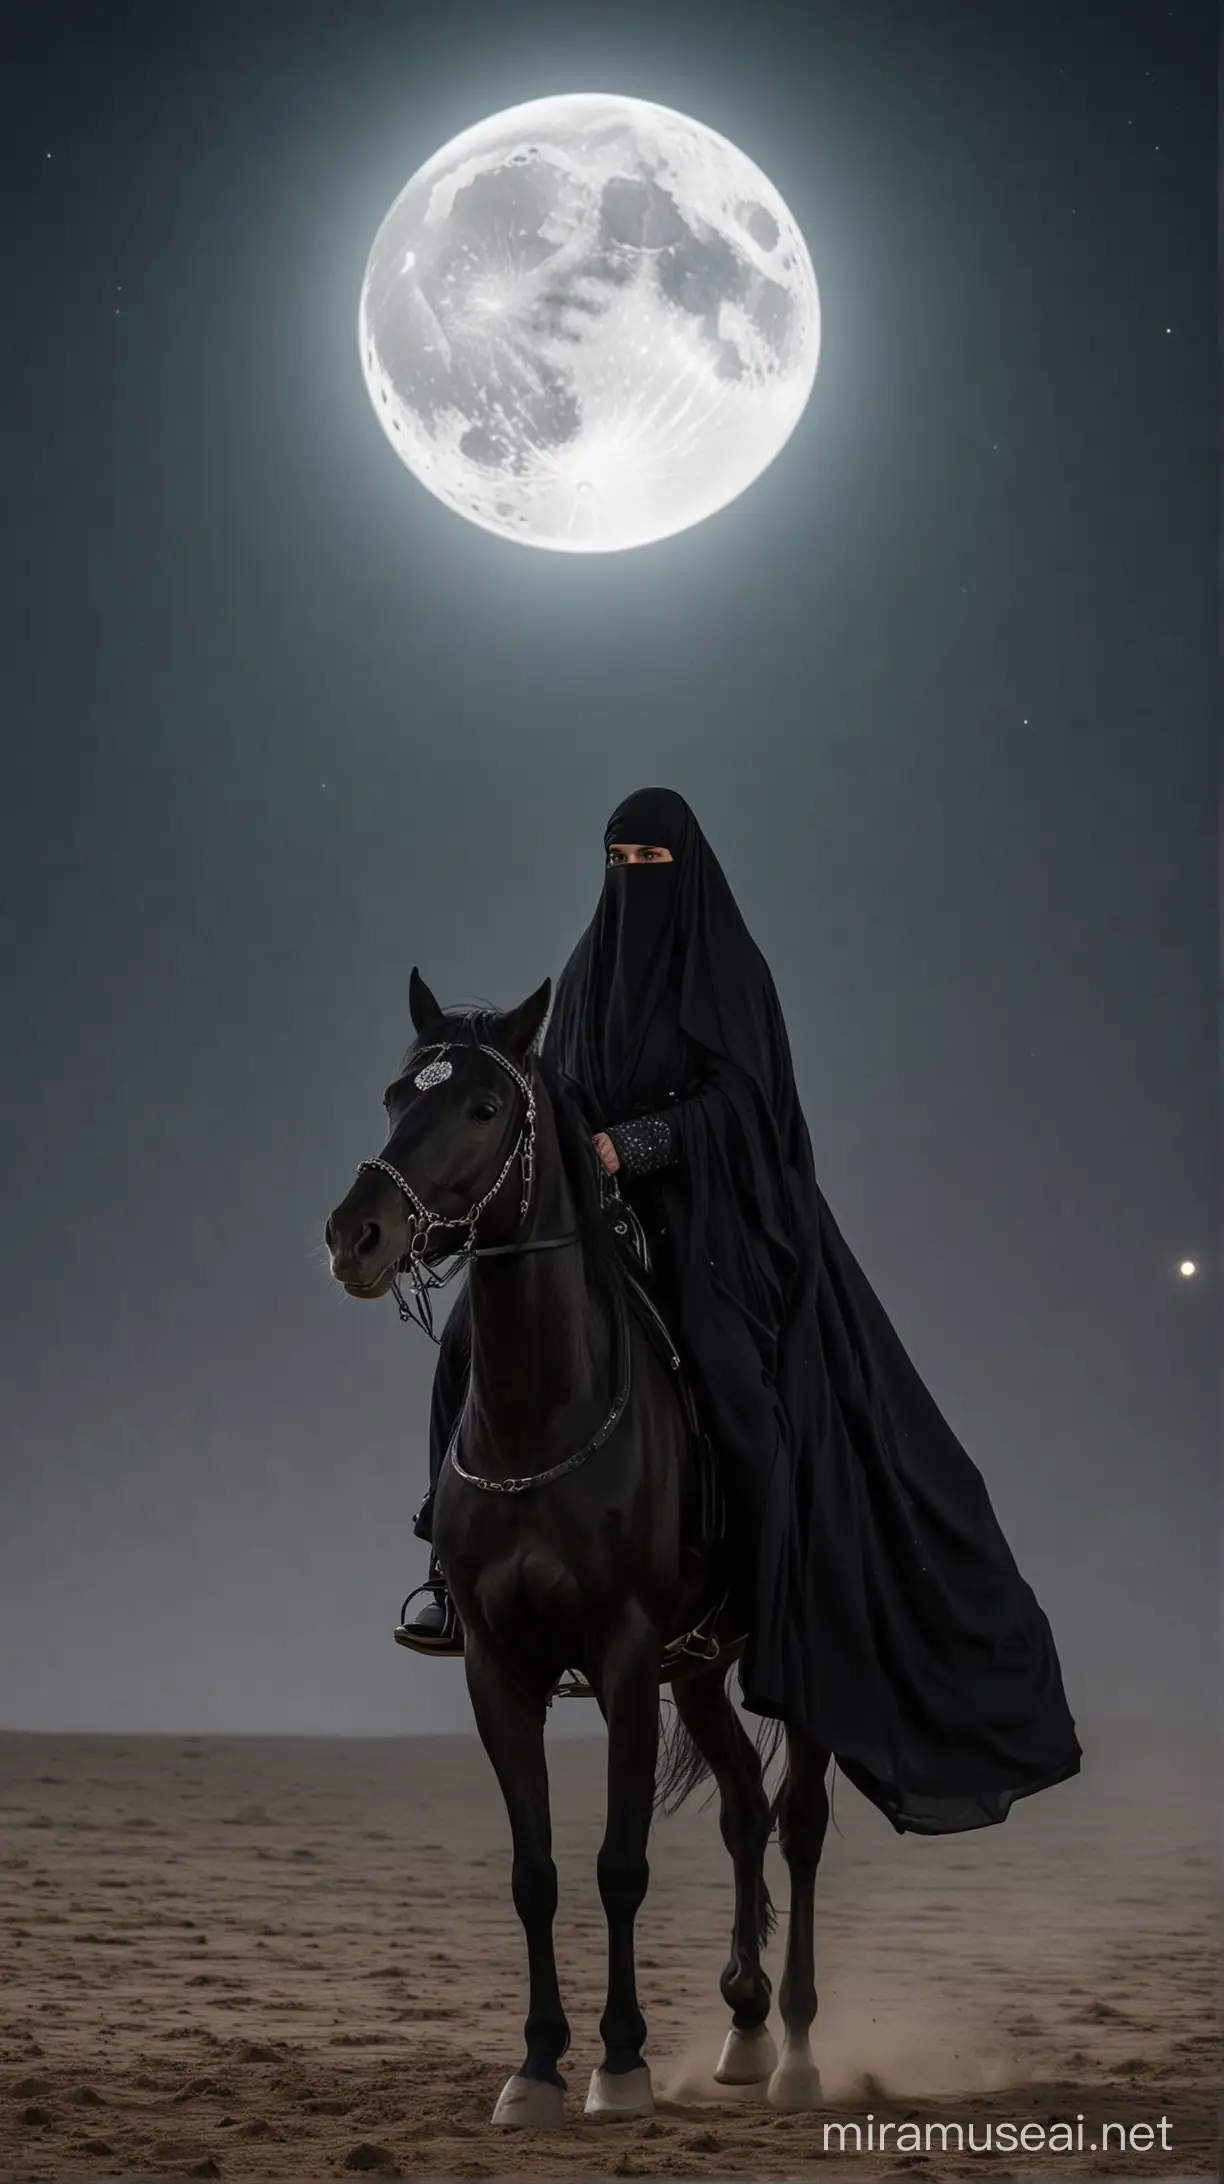 A woman wearing a niqab and a dark black dress is carried by a black horse and the moon above her is a luminous white glow behind them